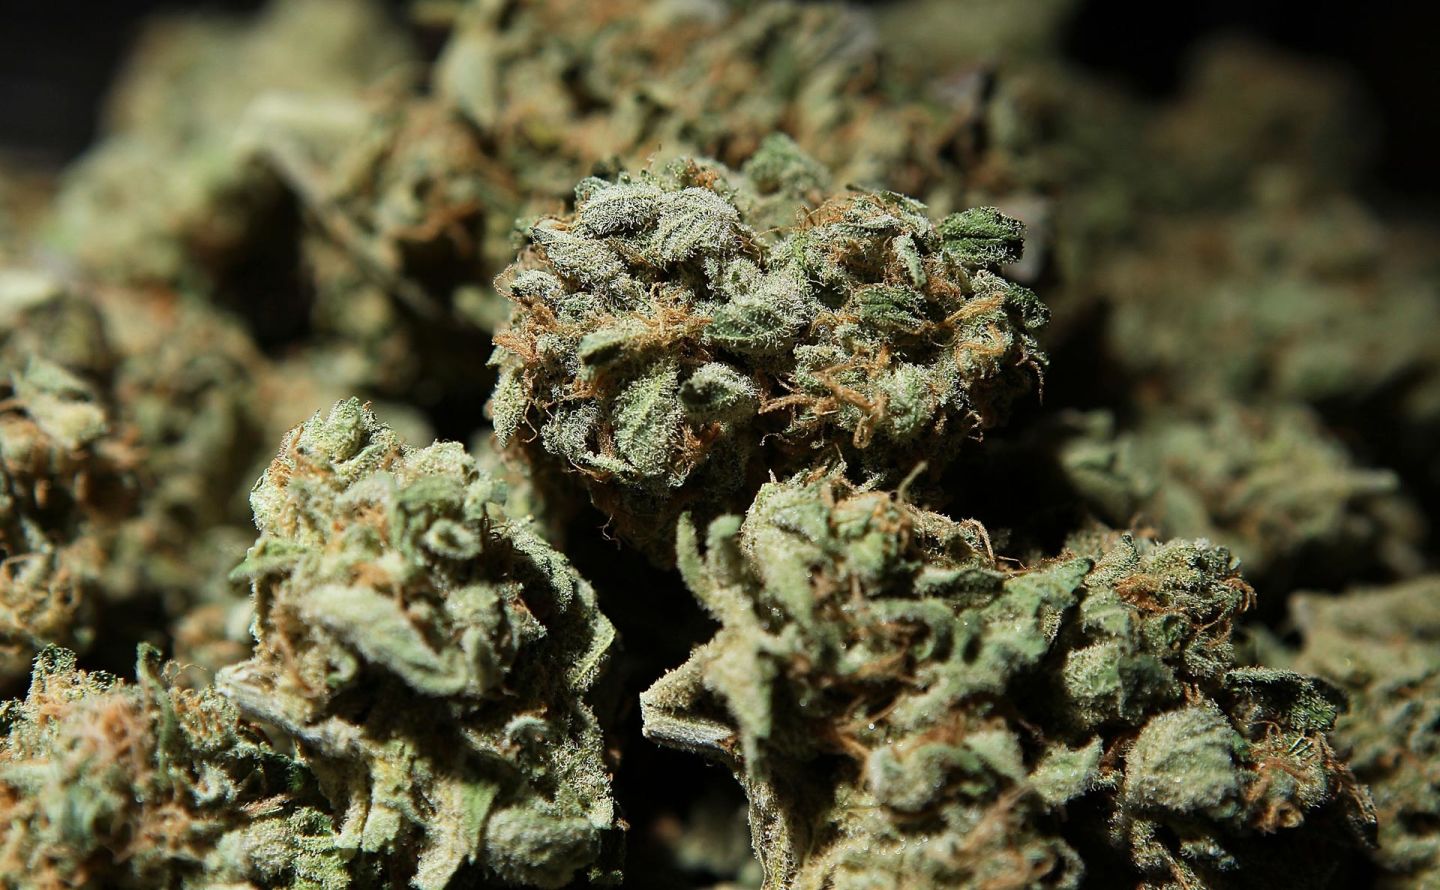 A bowl of medical marijuana displayed at the International Cannabis and Hemp Expo in 2010. Justin Sullivan/Getty Images